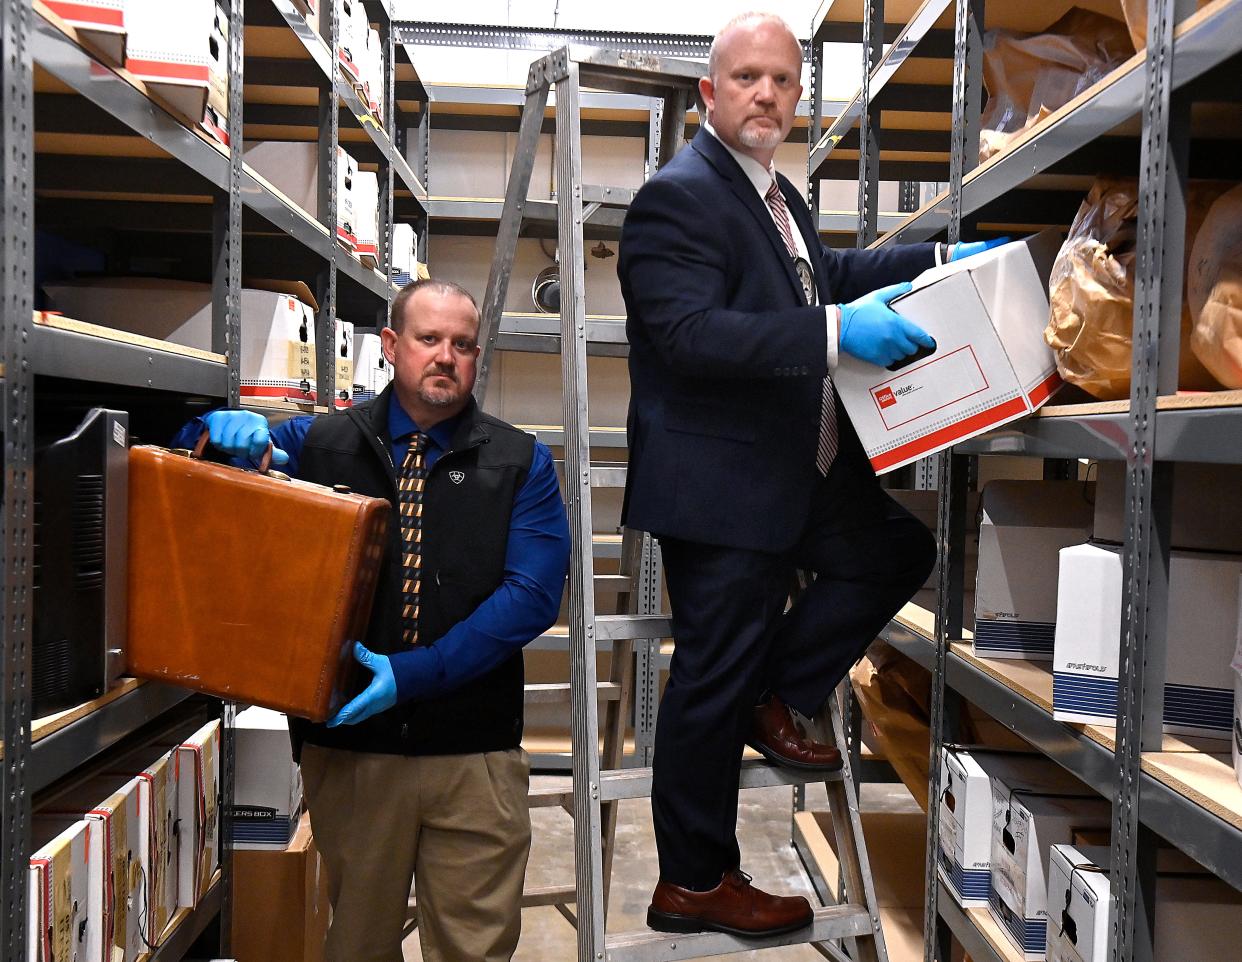 Abilene Police Department detectives Jeff Cowan (left) and Shawn Montgomery stand in the evidence room for murders at department headquarters Feb. 15, 2024. The men are members of APD’s Major Investigations Bureau, as well as the Cold Case Unit.